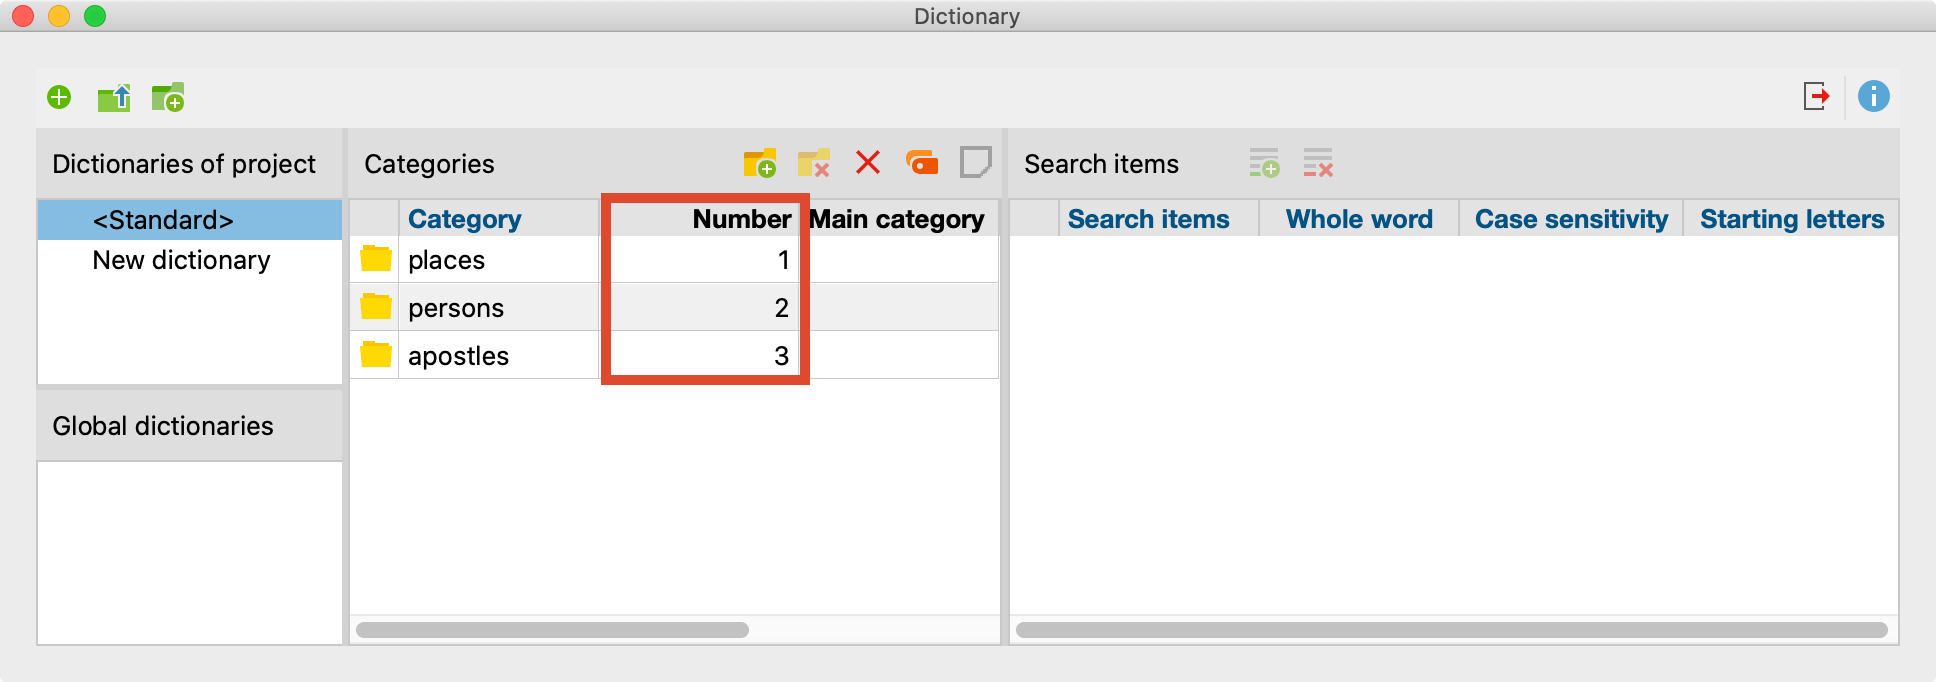 Each category has its own ID-number